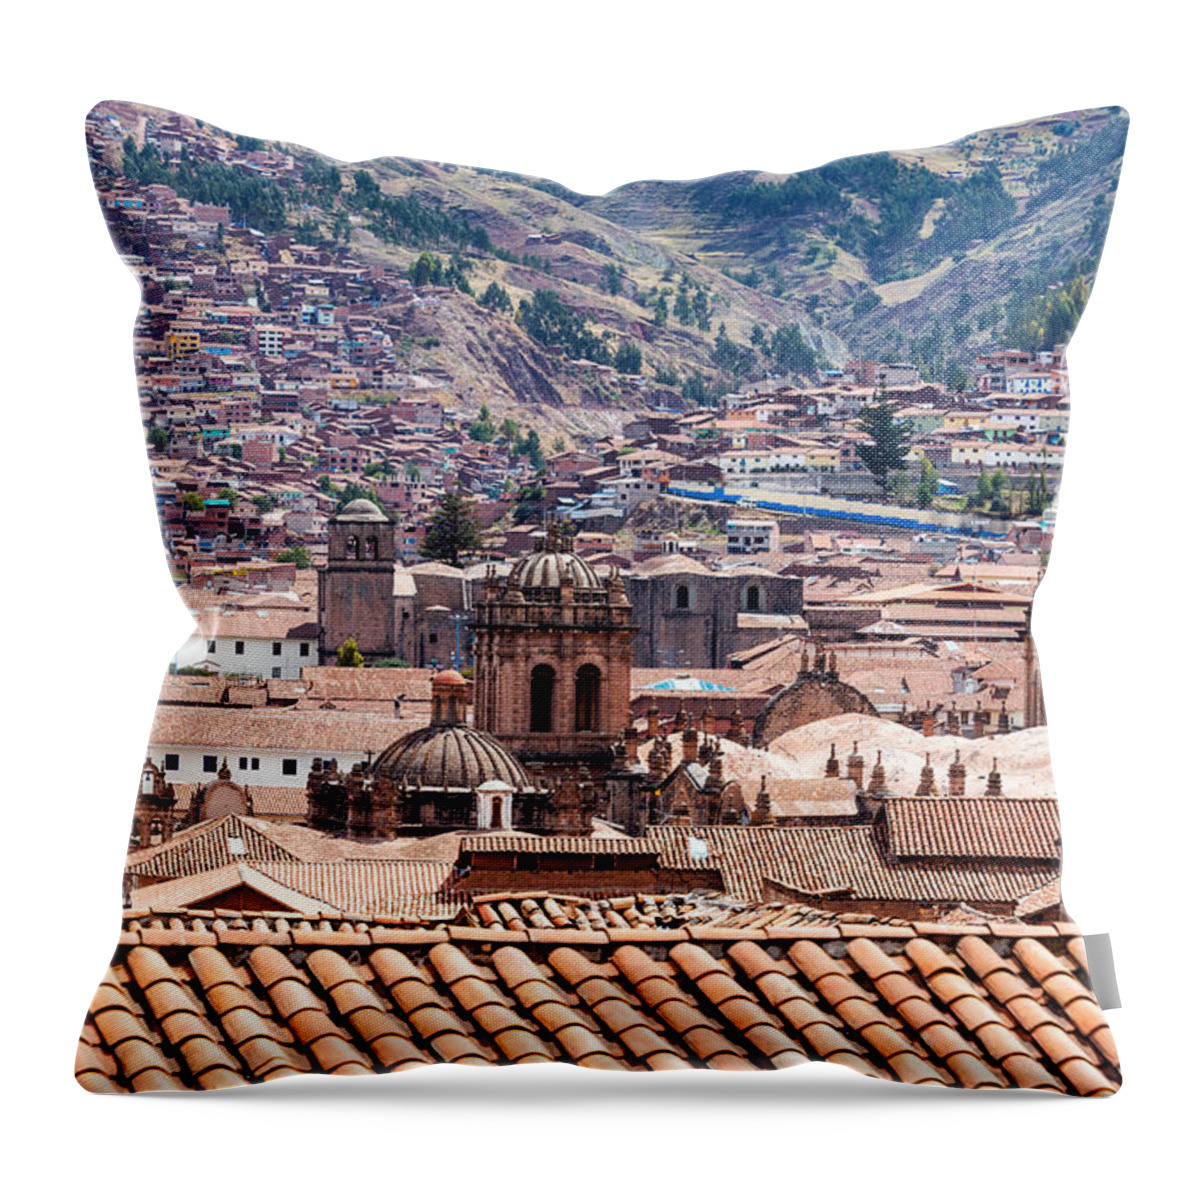 Cusco Throw Pillow featuring the photograph Cusco Cityscape by Jess Kraft